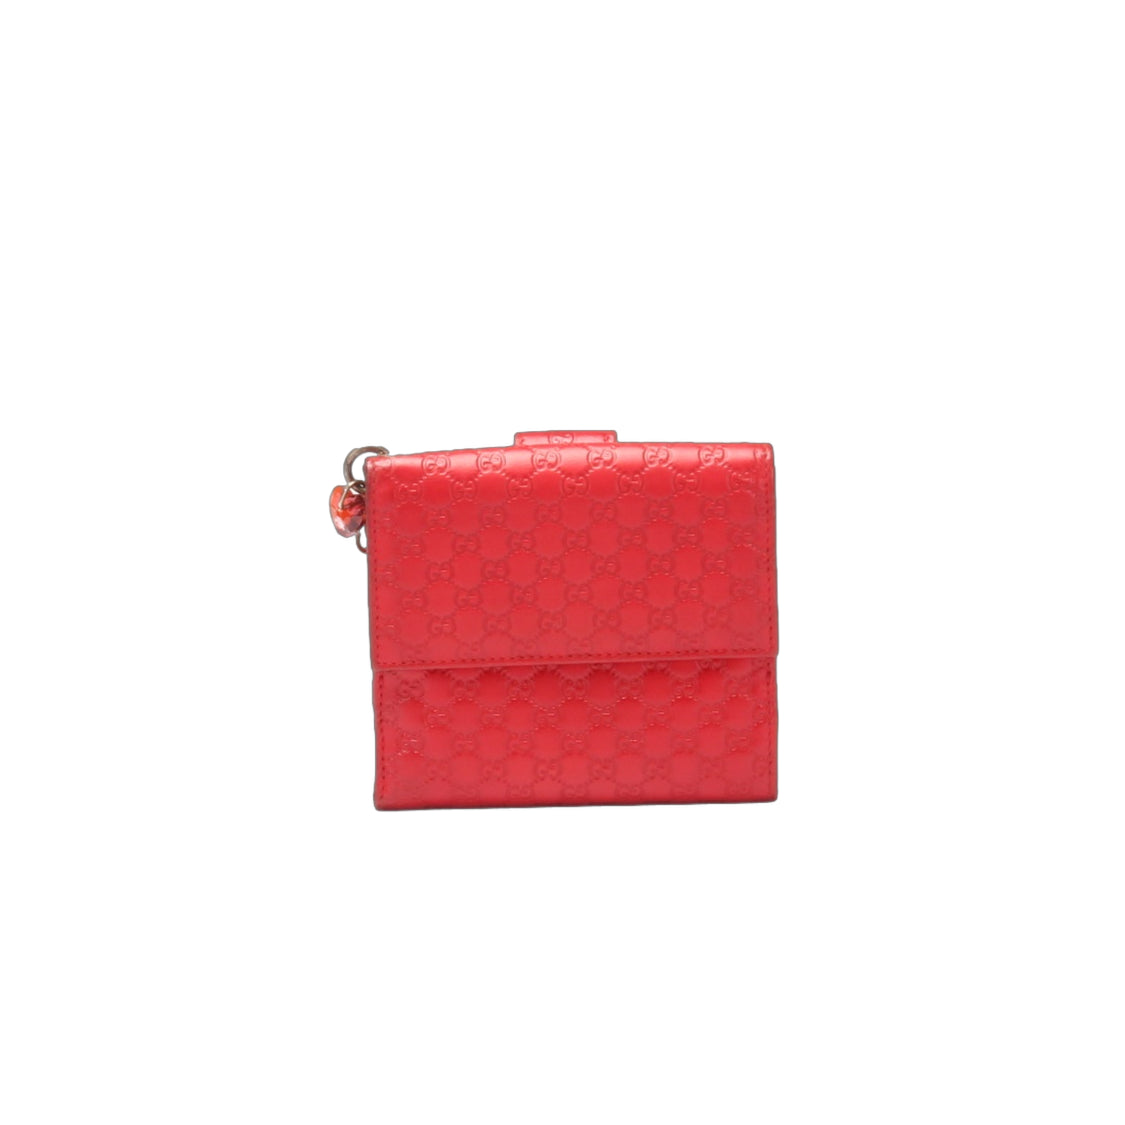 Gucci Microguccissima Leather Bifold Wallet Leather Short Wallet 282579 in Good condition